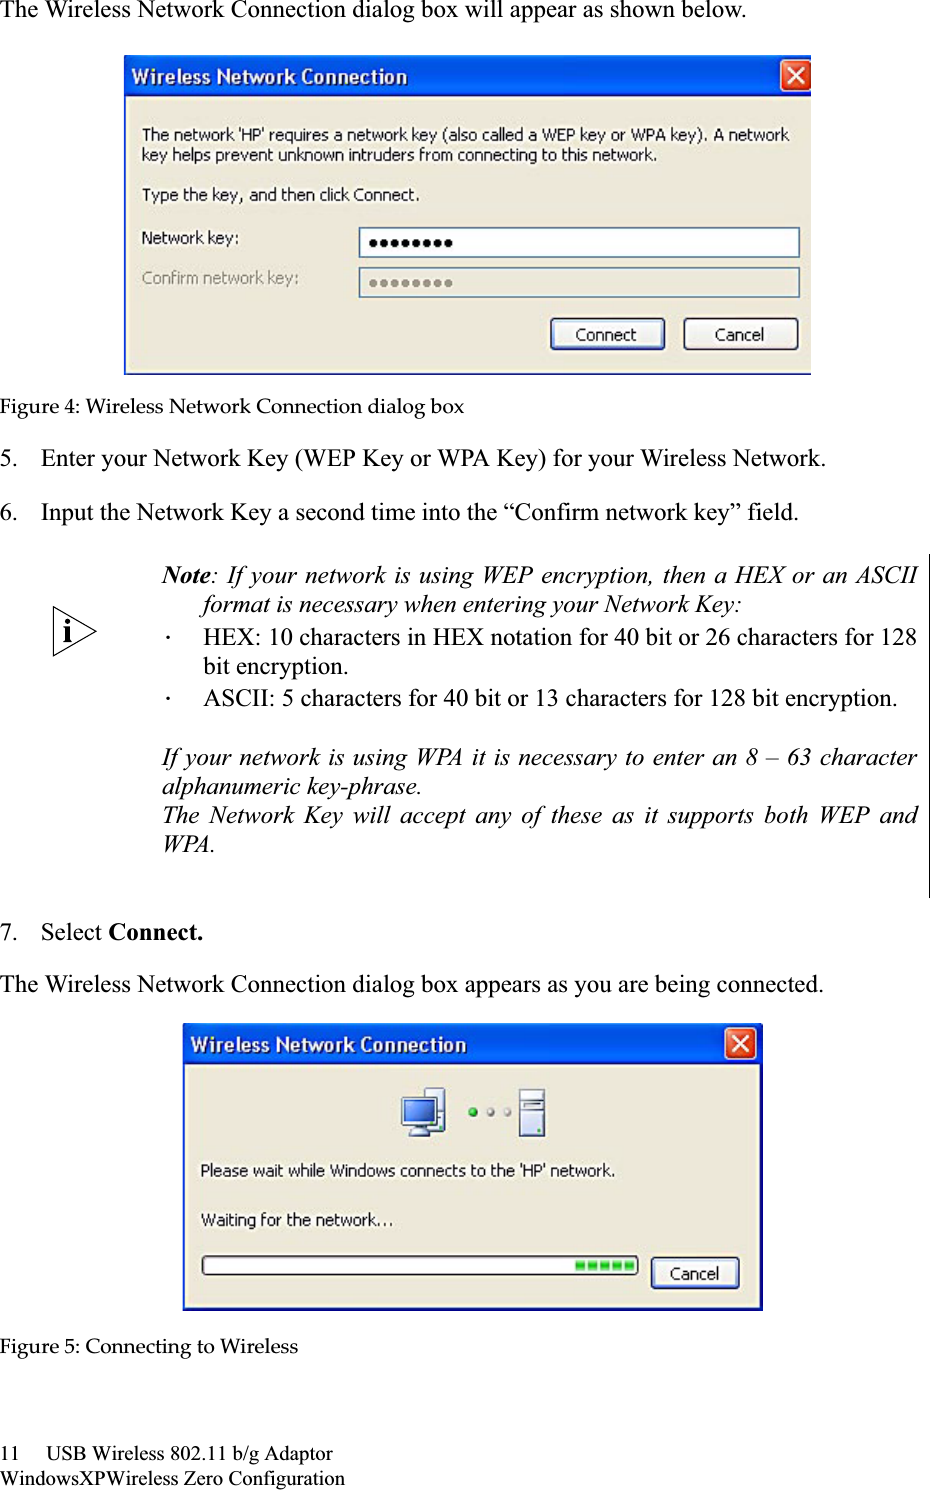 11     USB Wireless 802.11 b/g AdaptorWindowsXPWireless Zero ConfigurationThe Wireless Network Connection dialog box will appear as shown below.Figureȱ4:ȱWirelessȱNetworkȱConnectionȱdialogȱbox5. Enter your Network Key (WEP Key or WPA Key) for your Wireless Network.6. Input the Network Key a second time into the “Confirm network key” field.7. Select Connect.The Wireless Network Connection dialog box appears as you are being connected.Figureȱ5:ȱConnectingȱtoȱWirelessNote: If your network is using WEP encryption, then a HEX or an ASCIIformat is necessary when entering your Network Key:ΗHEX: 10 characters in HEX notation for 40 bit or 26 characters for 128bit encryption.ΗASCII: 5 characters for 40 bit or 13 characters for 128 bit encryption.If your network is using WPA it is necessary to enter an 8 – 63 characteralphanumeric key-phrase.The Network Key will accept any of these as it supports both WEP andWPA.